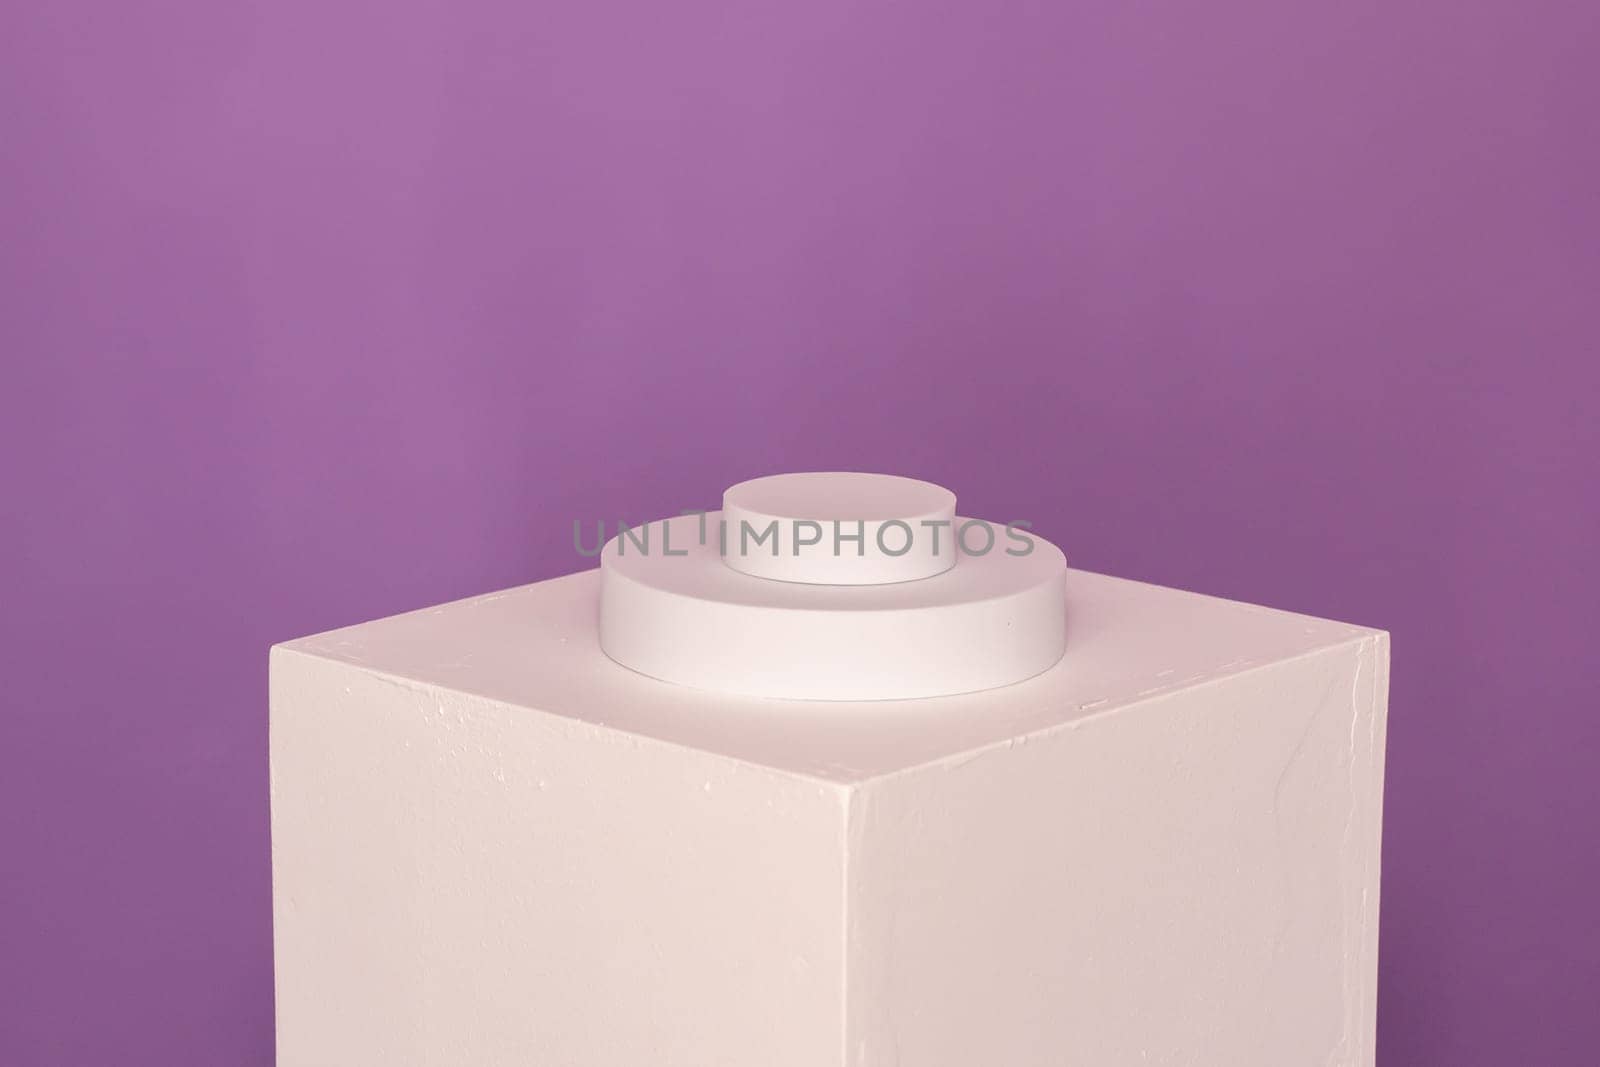 Pedestals product photography mockup. High quality photo